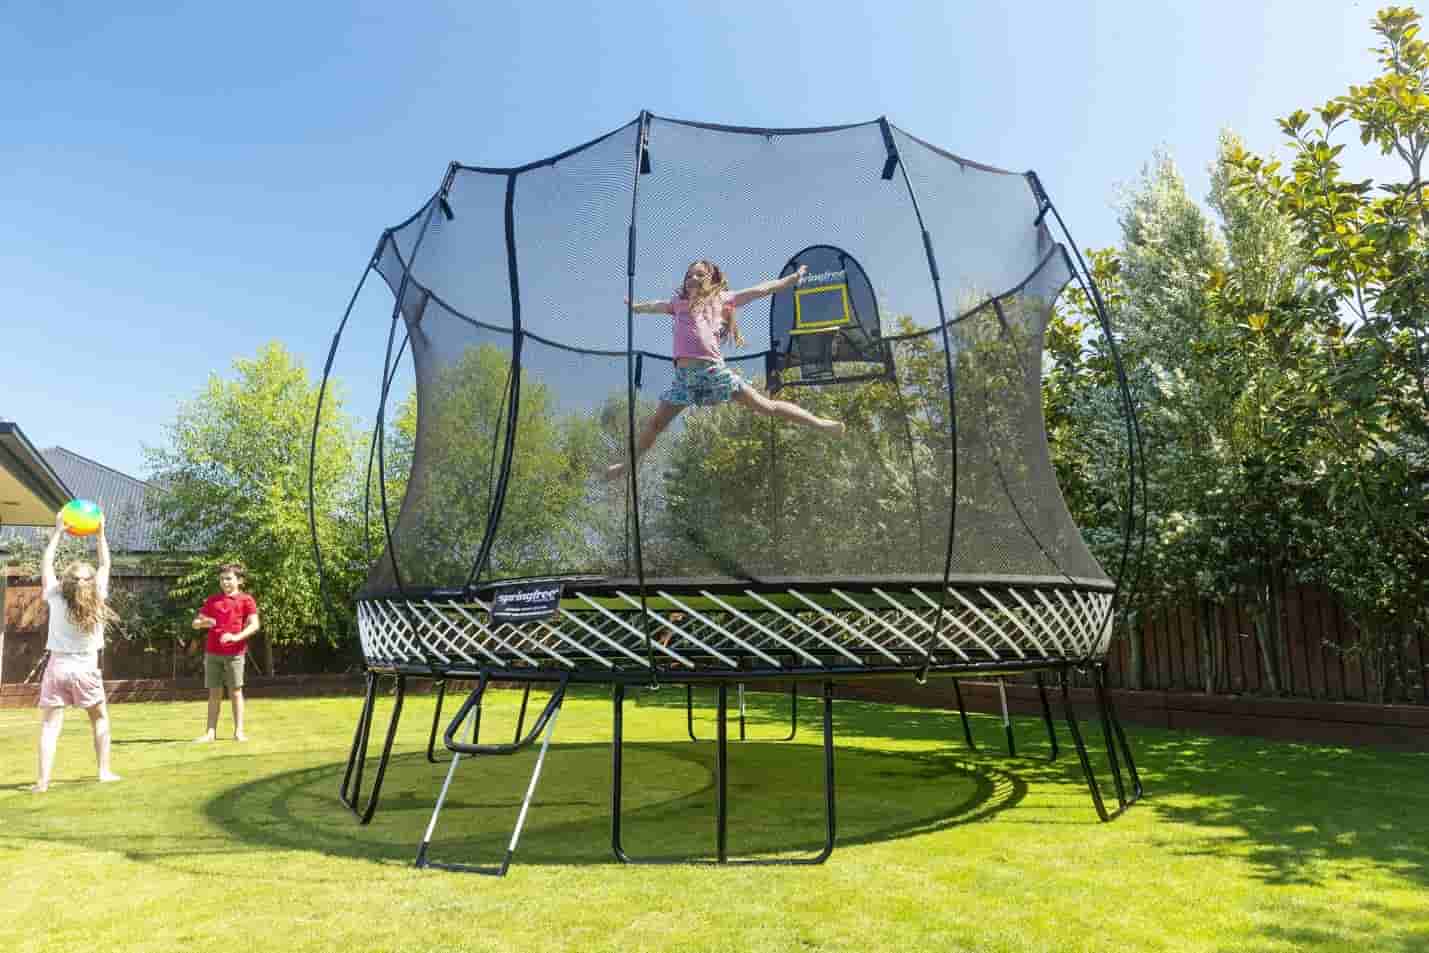 A girl jumping on a trampoline while two other children throw a ball on the side of the trampoline.